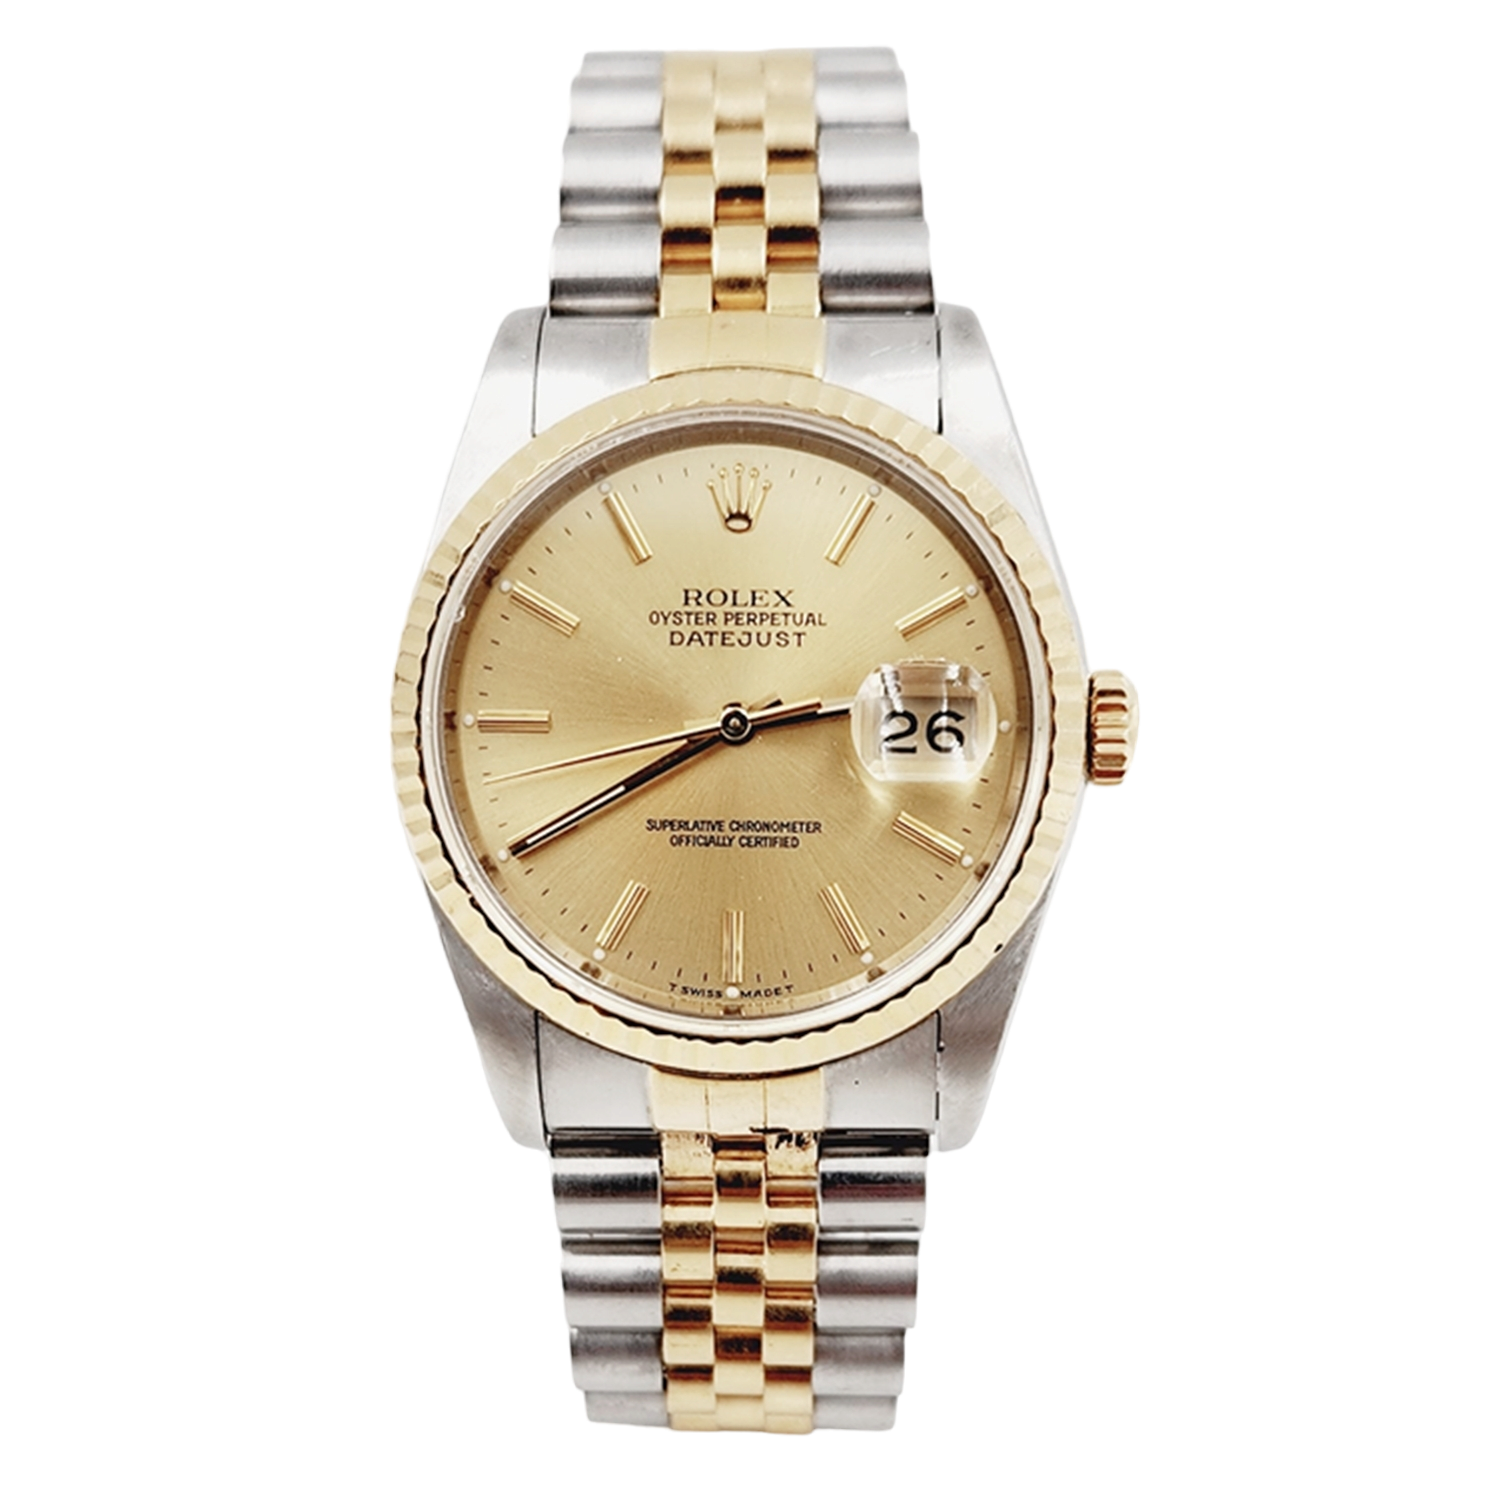 Men's Rolex 36mm DateJust Two Tone 18K Yellow Gold / Stainless Steel Watch with Champagne Dial and Fluted Bezel. (Pre-Owned 16233)